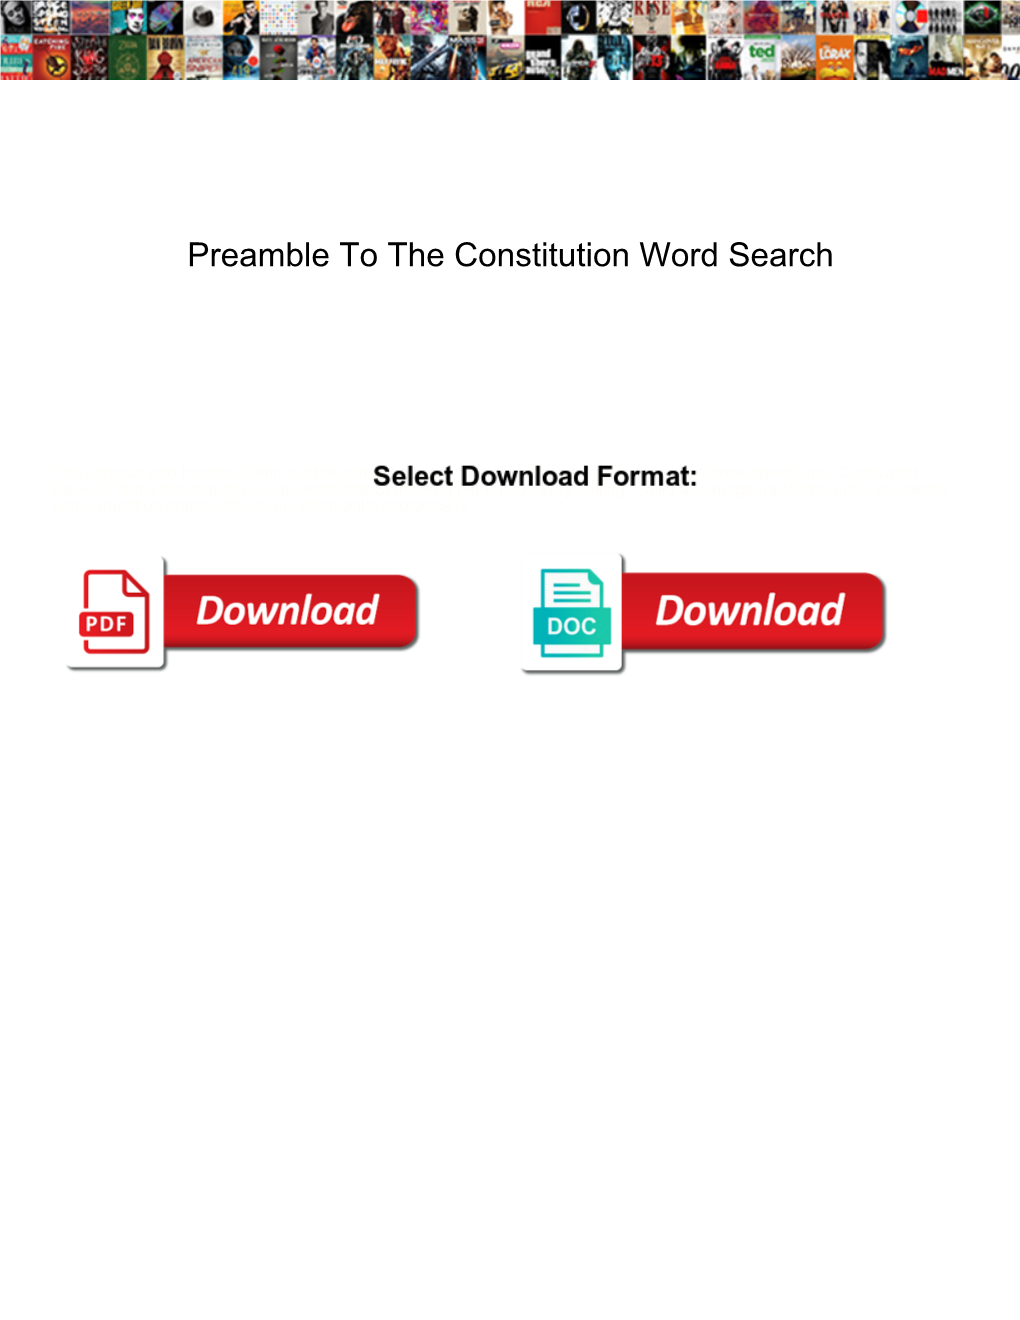 Preamble to the Constitution Word Search